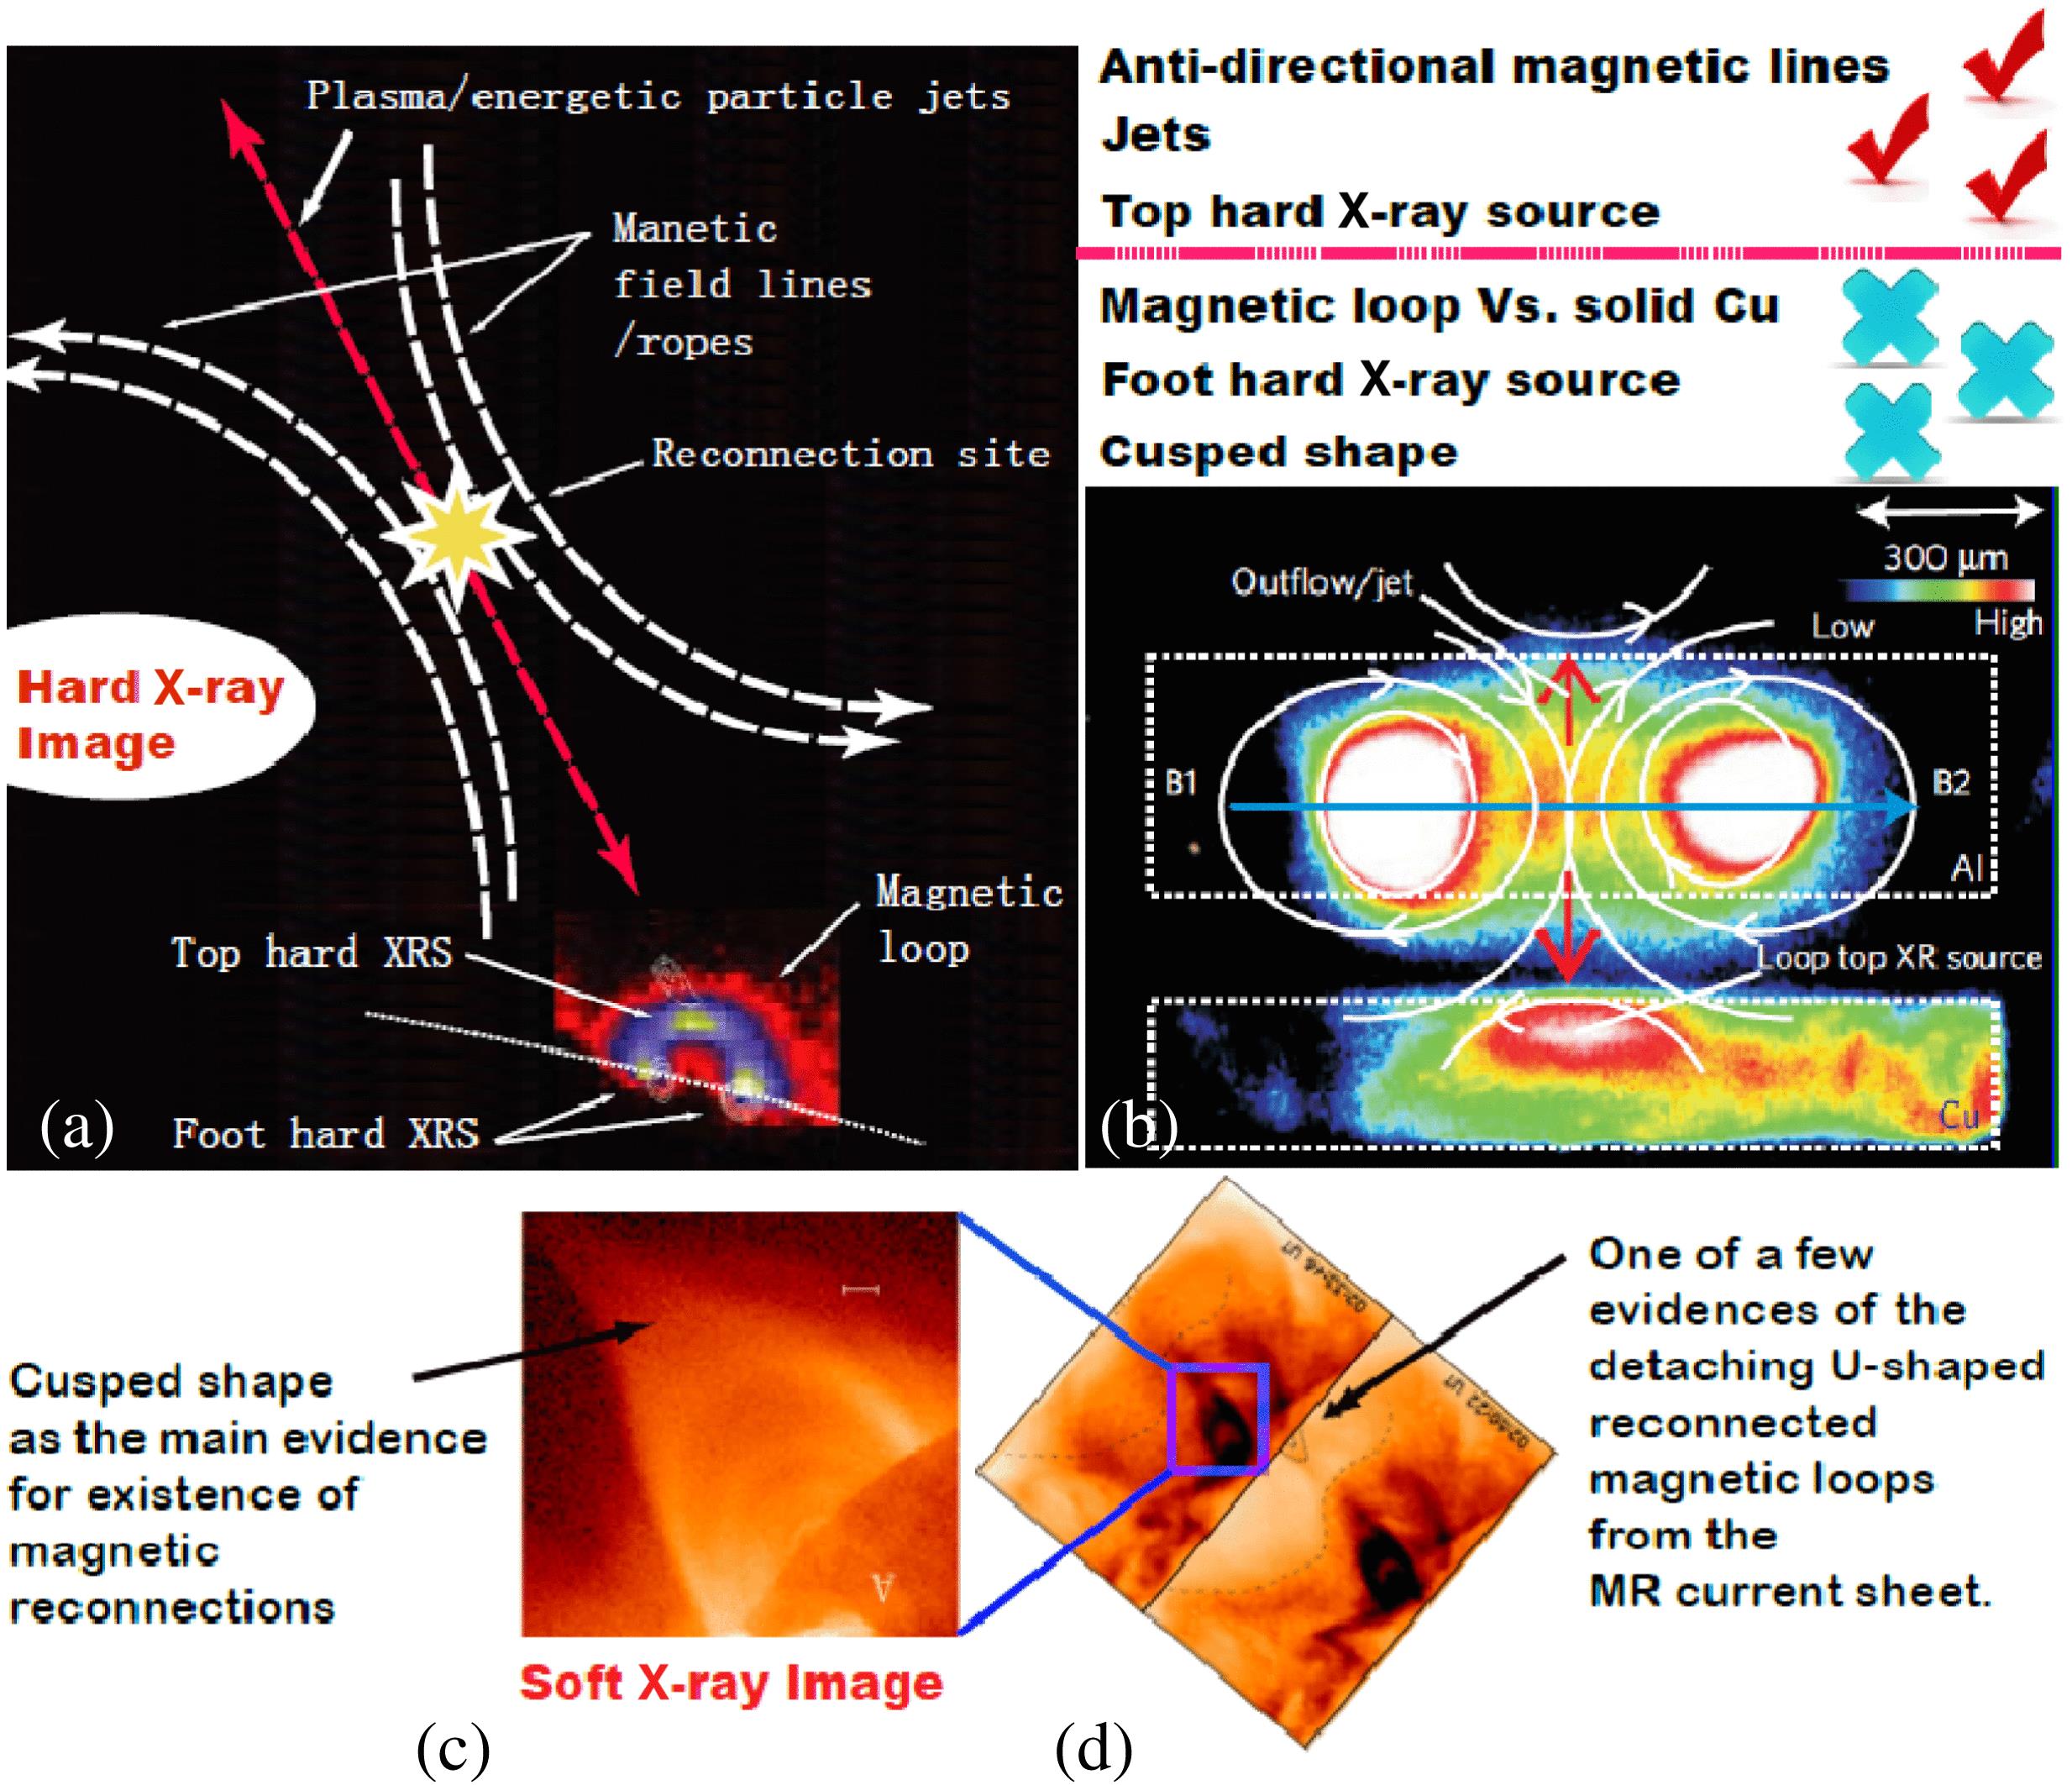 Detailed comparisons between the solar phenomena and the experimental results. (a) shows the loop-top hard-X-ray spot as well as the two loop-foot spots, with the sketch indicating the invoked magnetic reconnection as the cause; (b) is the experimental results with a bright X-ray spot on the Cu target initially set in the path of the expected MR outflow; (c) shows the Yohkoh-recorded cusp-shaped magnetic loop at the end of the MR current sheet near the solar photospheric surface, and (d) the detaching U-shaped magnetic loop from the other end of the current sheet.